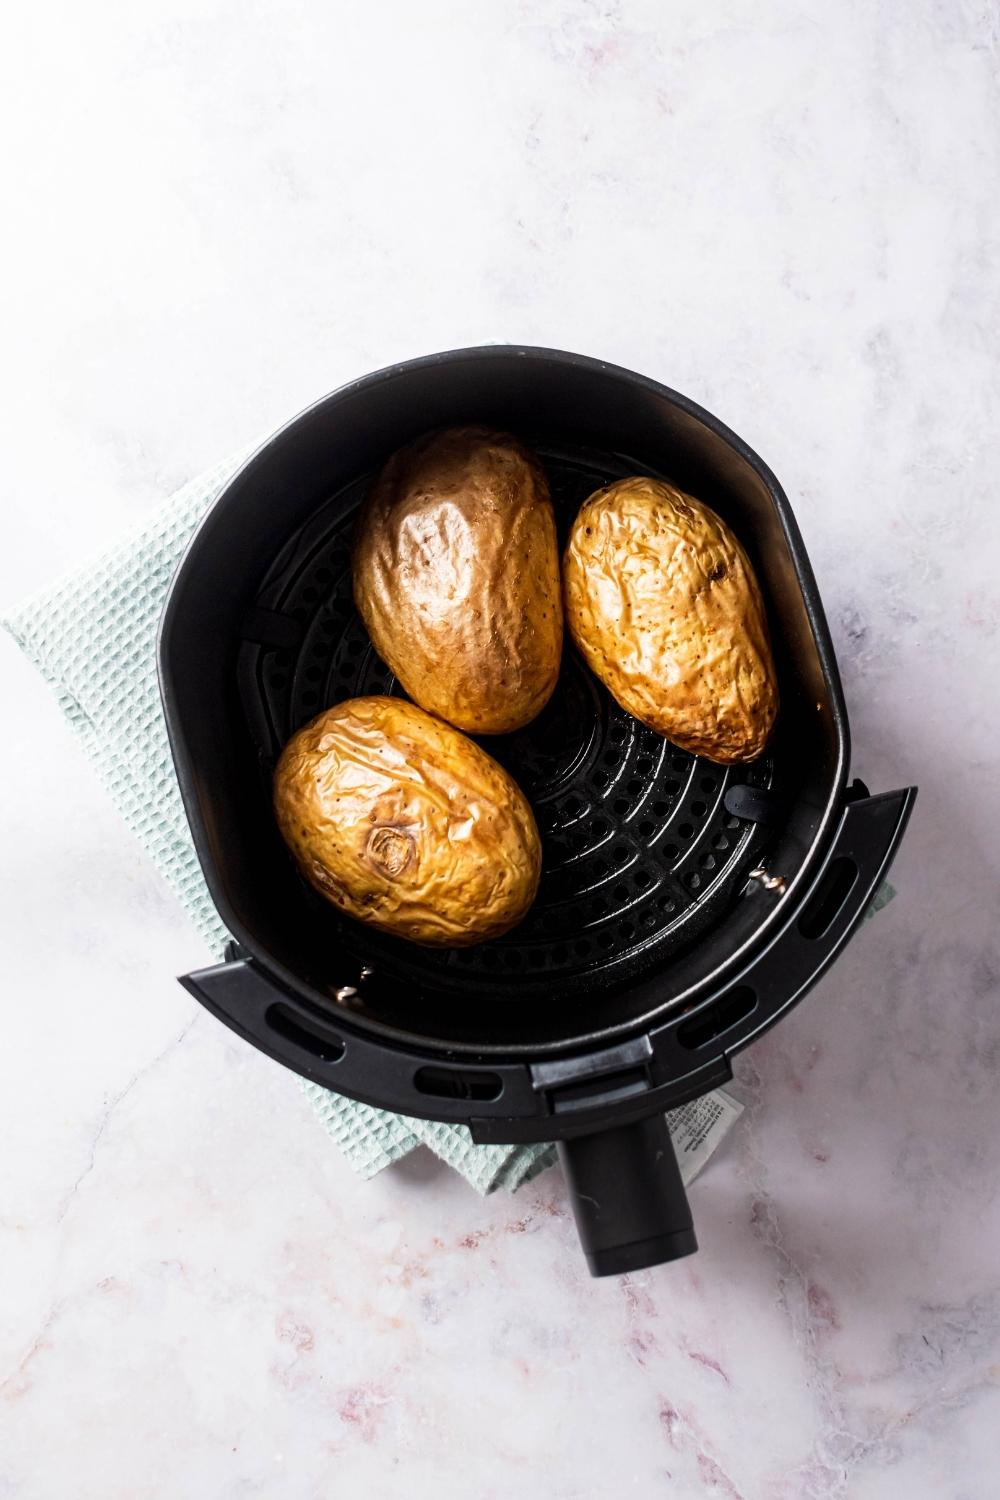 Three baked potatoes in an air fryer.